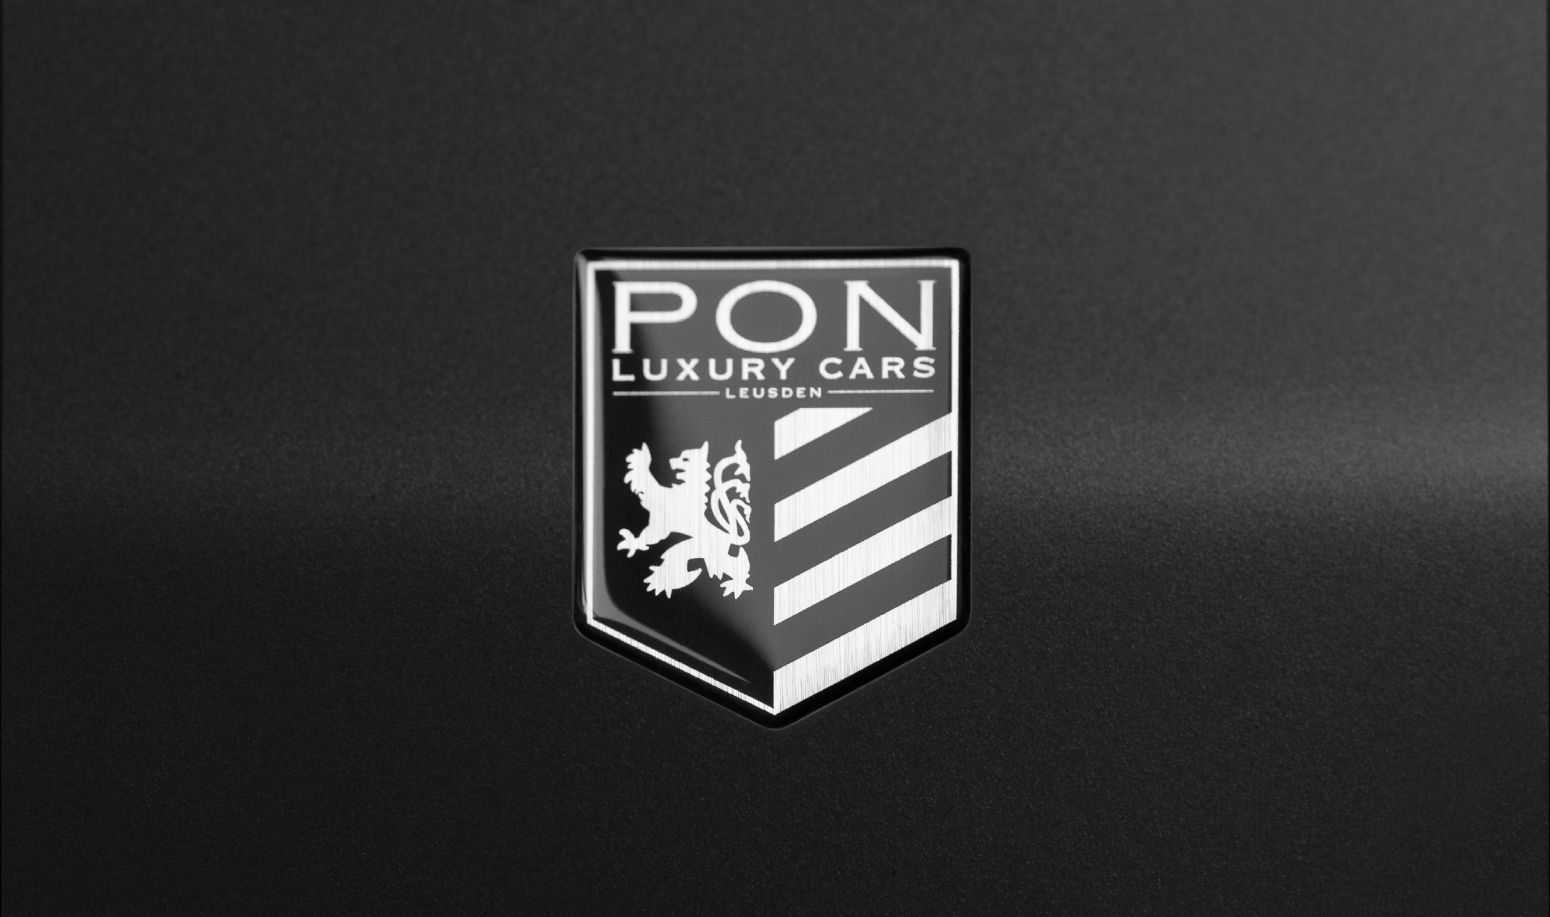 Pon Luxury Cars - AGH & Friends